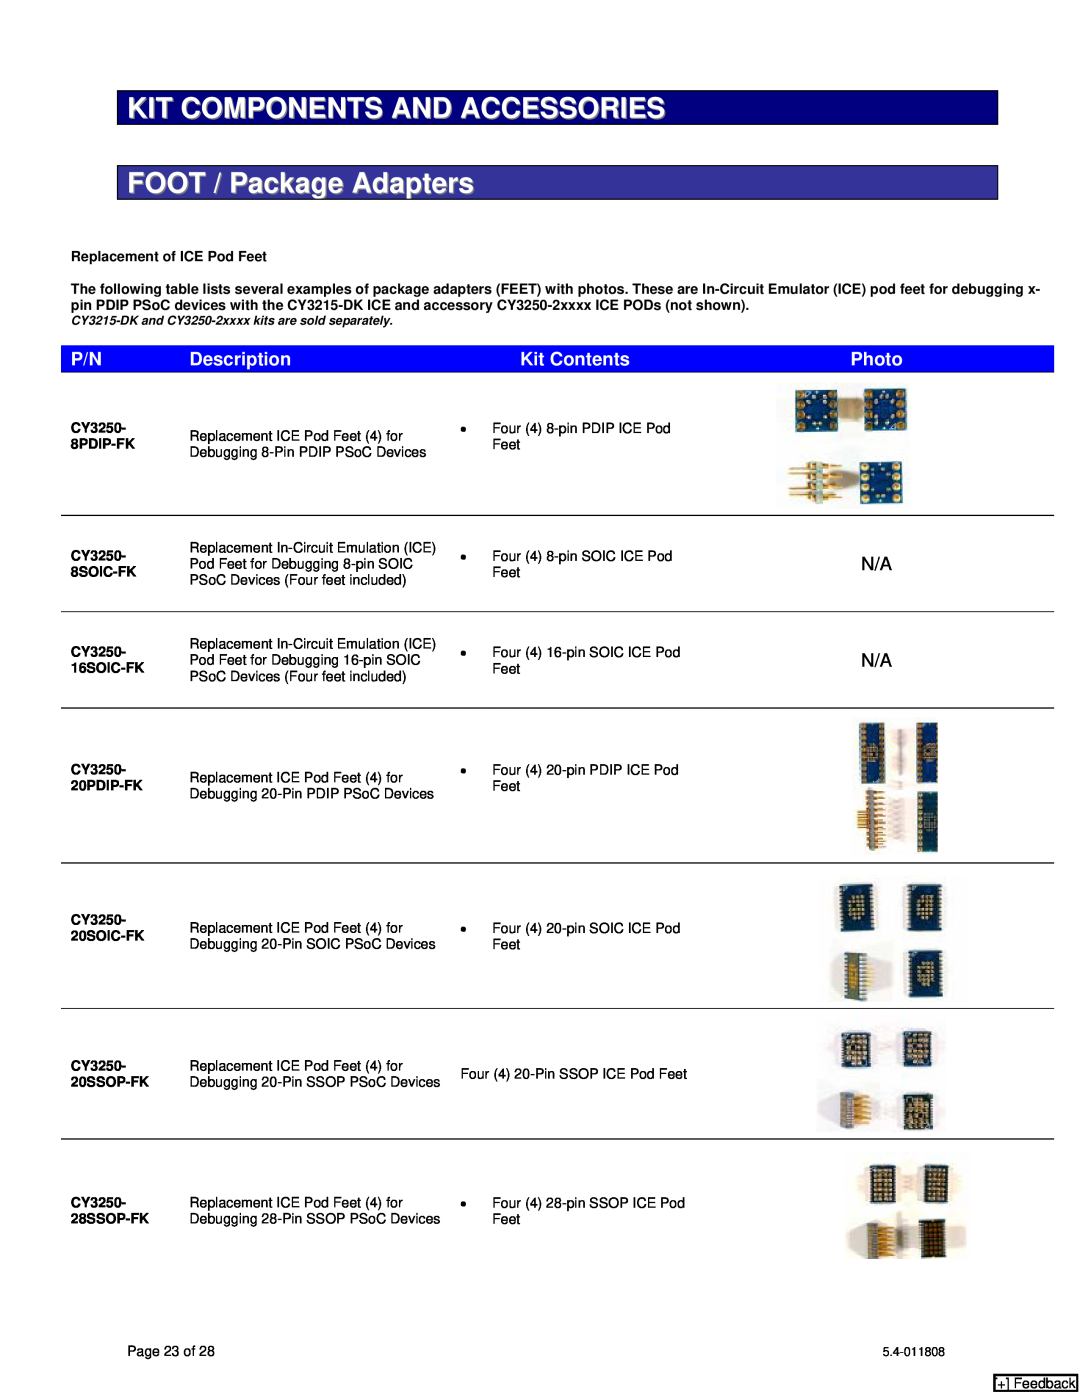 Cypress CY8C24x23A KIT COMPONENTS AND ACCESSORIES FOOT / Package Adapters, Description, Kit Contents, Photo, + Feedback 